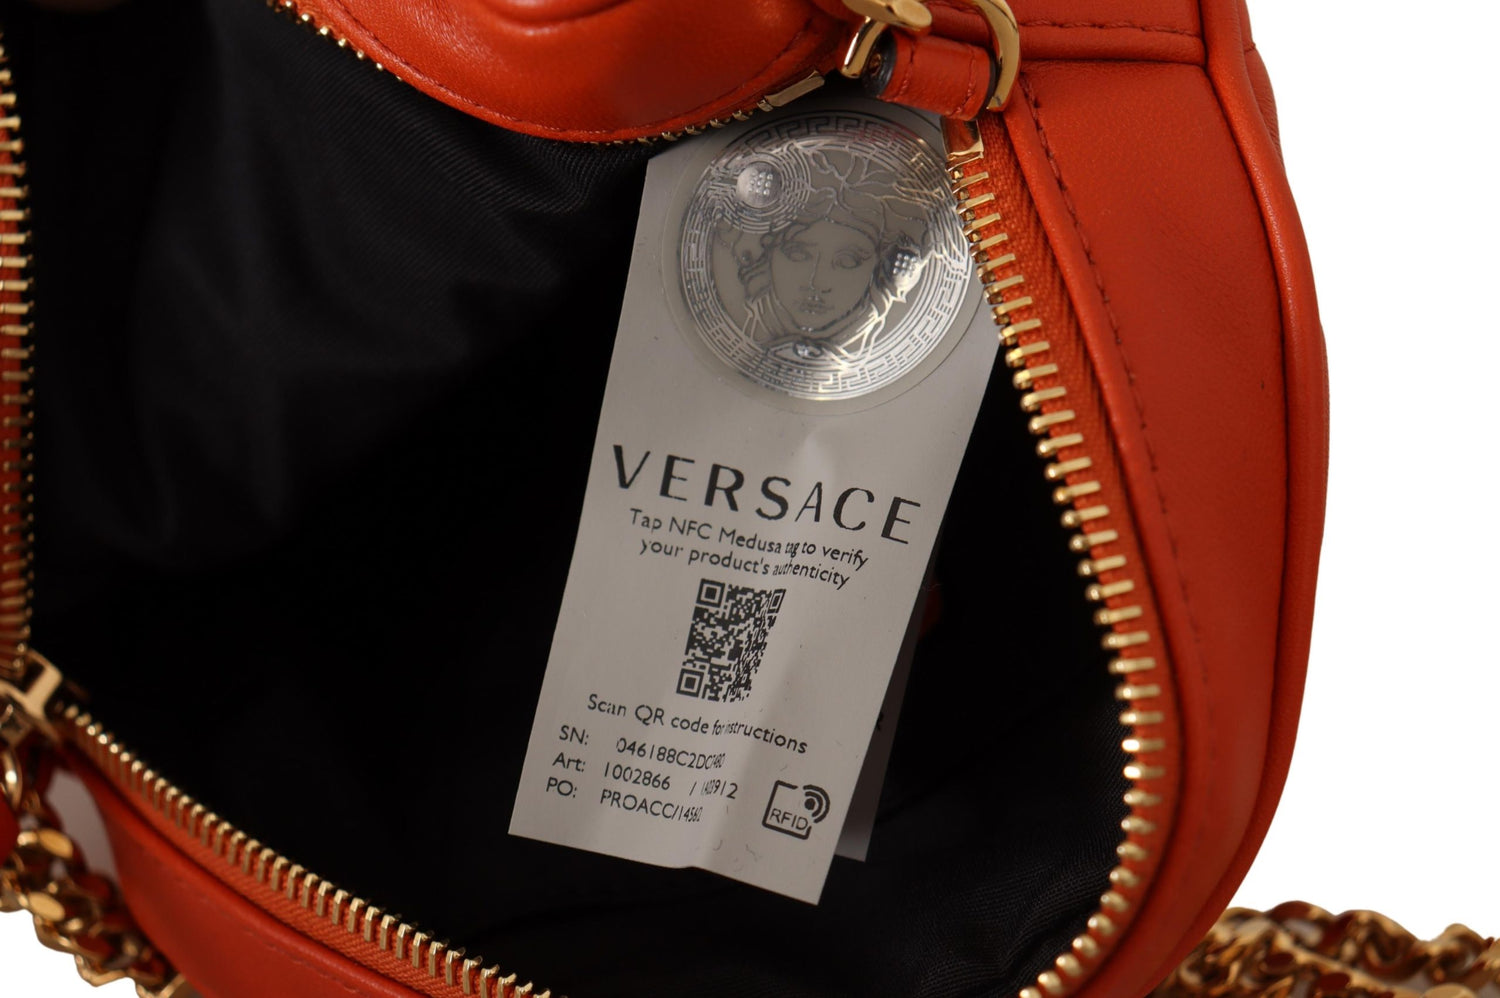 Versace Medusa Leather Crossbody Bag In Red